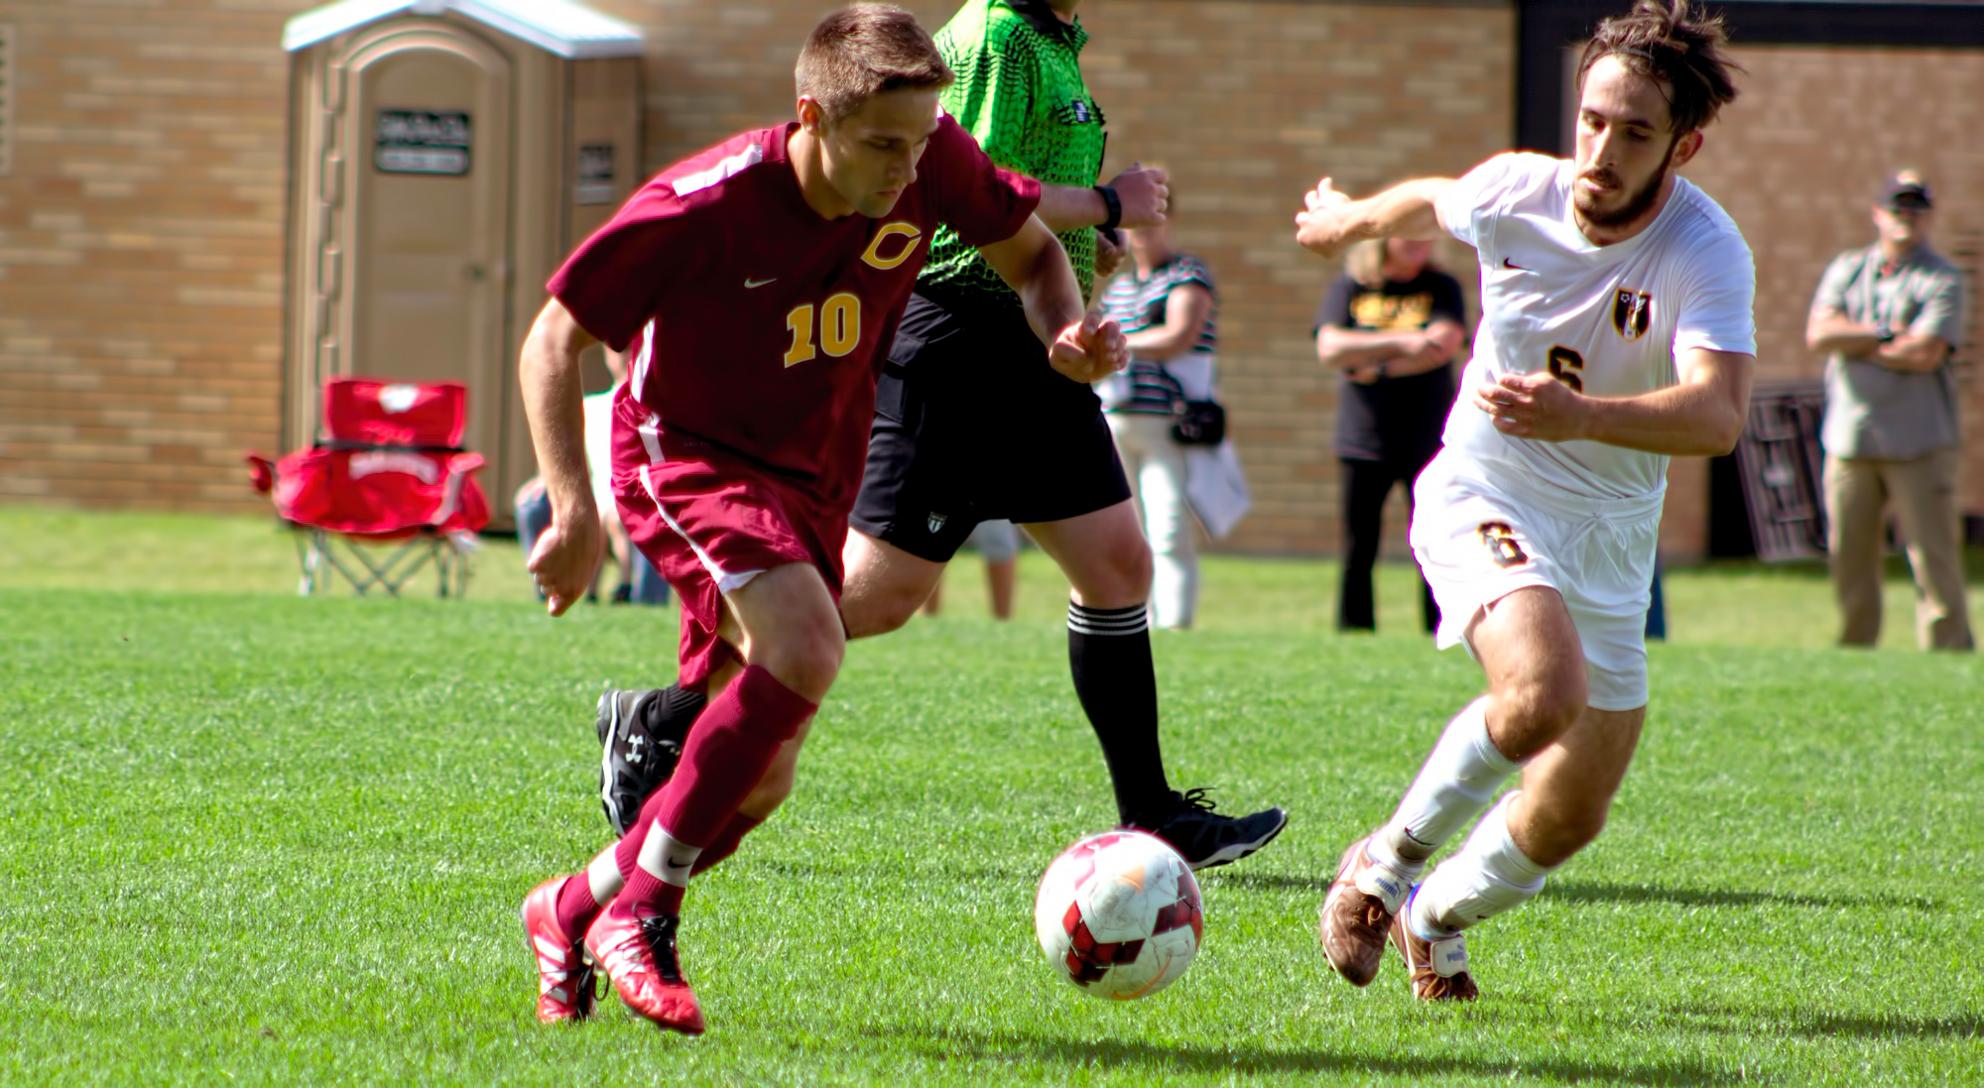 Senior Sage Thornbrugh scored the team's lone goal in the Cobbers' 1-1 2OT tie with Simpson on  Sunday.